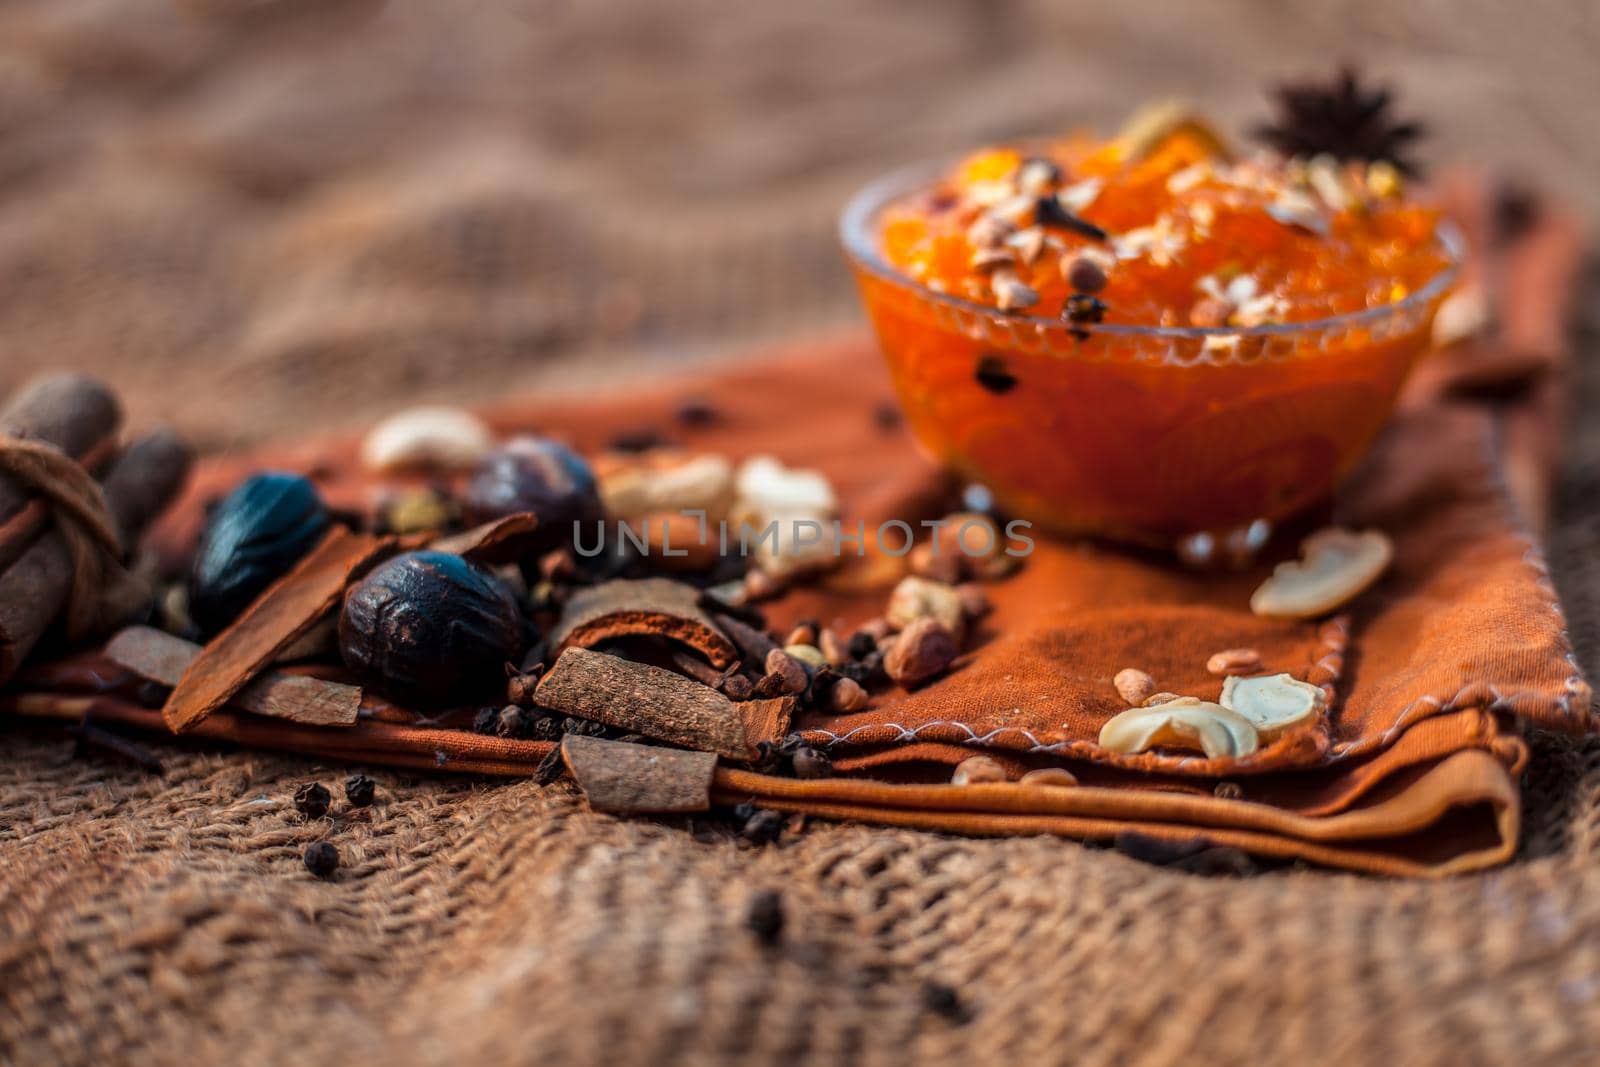 Famous mango preservation i.e. Murba or Murabba in a glass bowl on jute bags surface along with dry fruits and spices with it.Horizontal shot with background blurred.